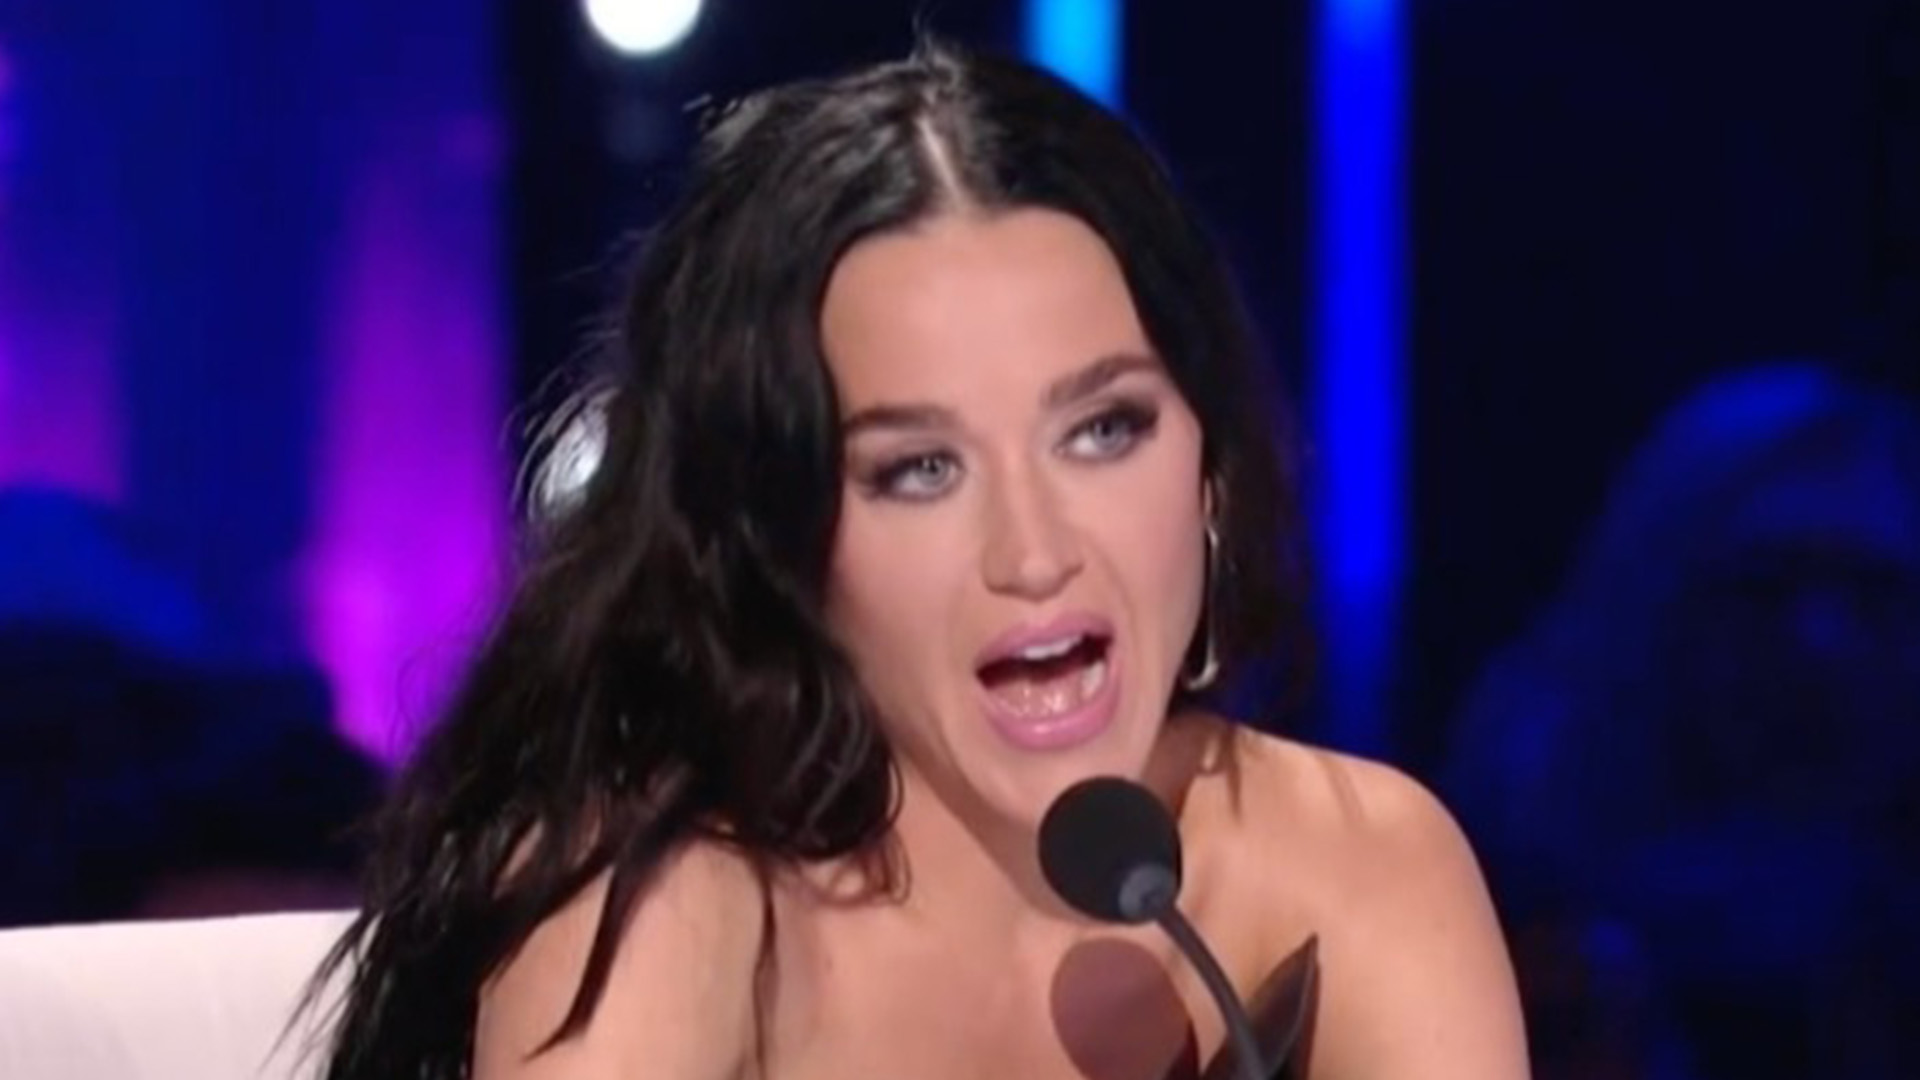 American Idol’s Katy Perry snaps ‘you blew her spot!’ at Luke Bryan after he calls out Mia Matthews for lyrics mishap [Video]